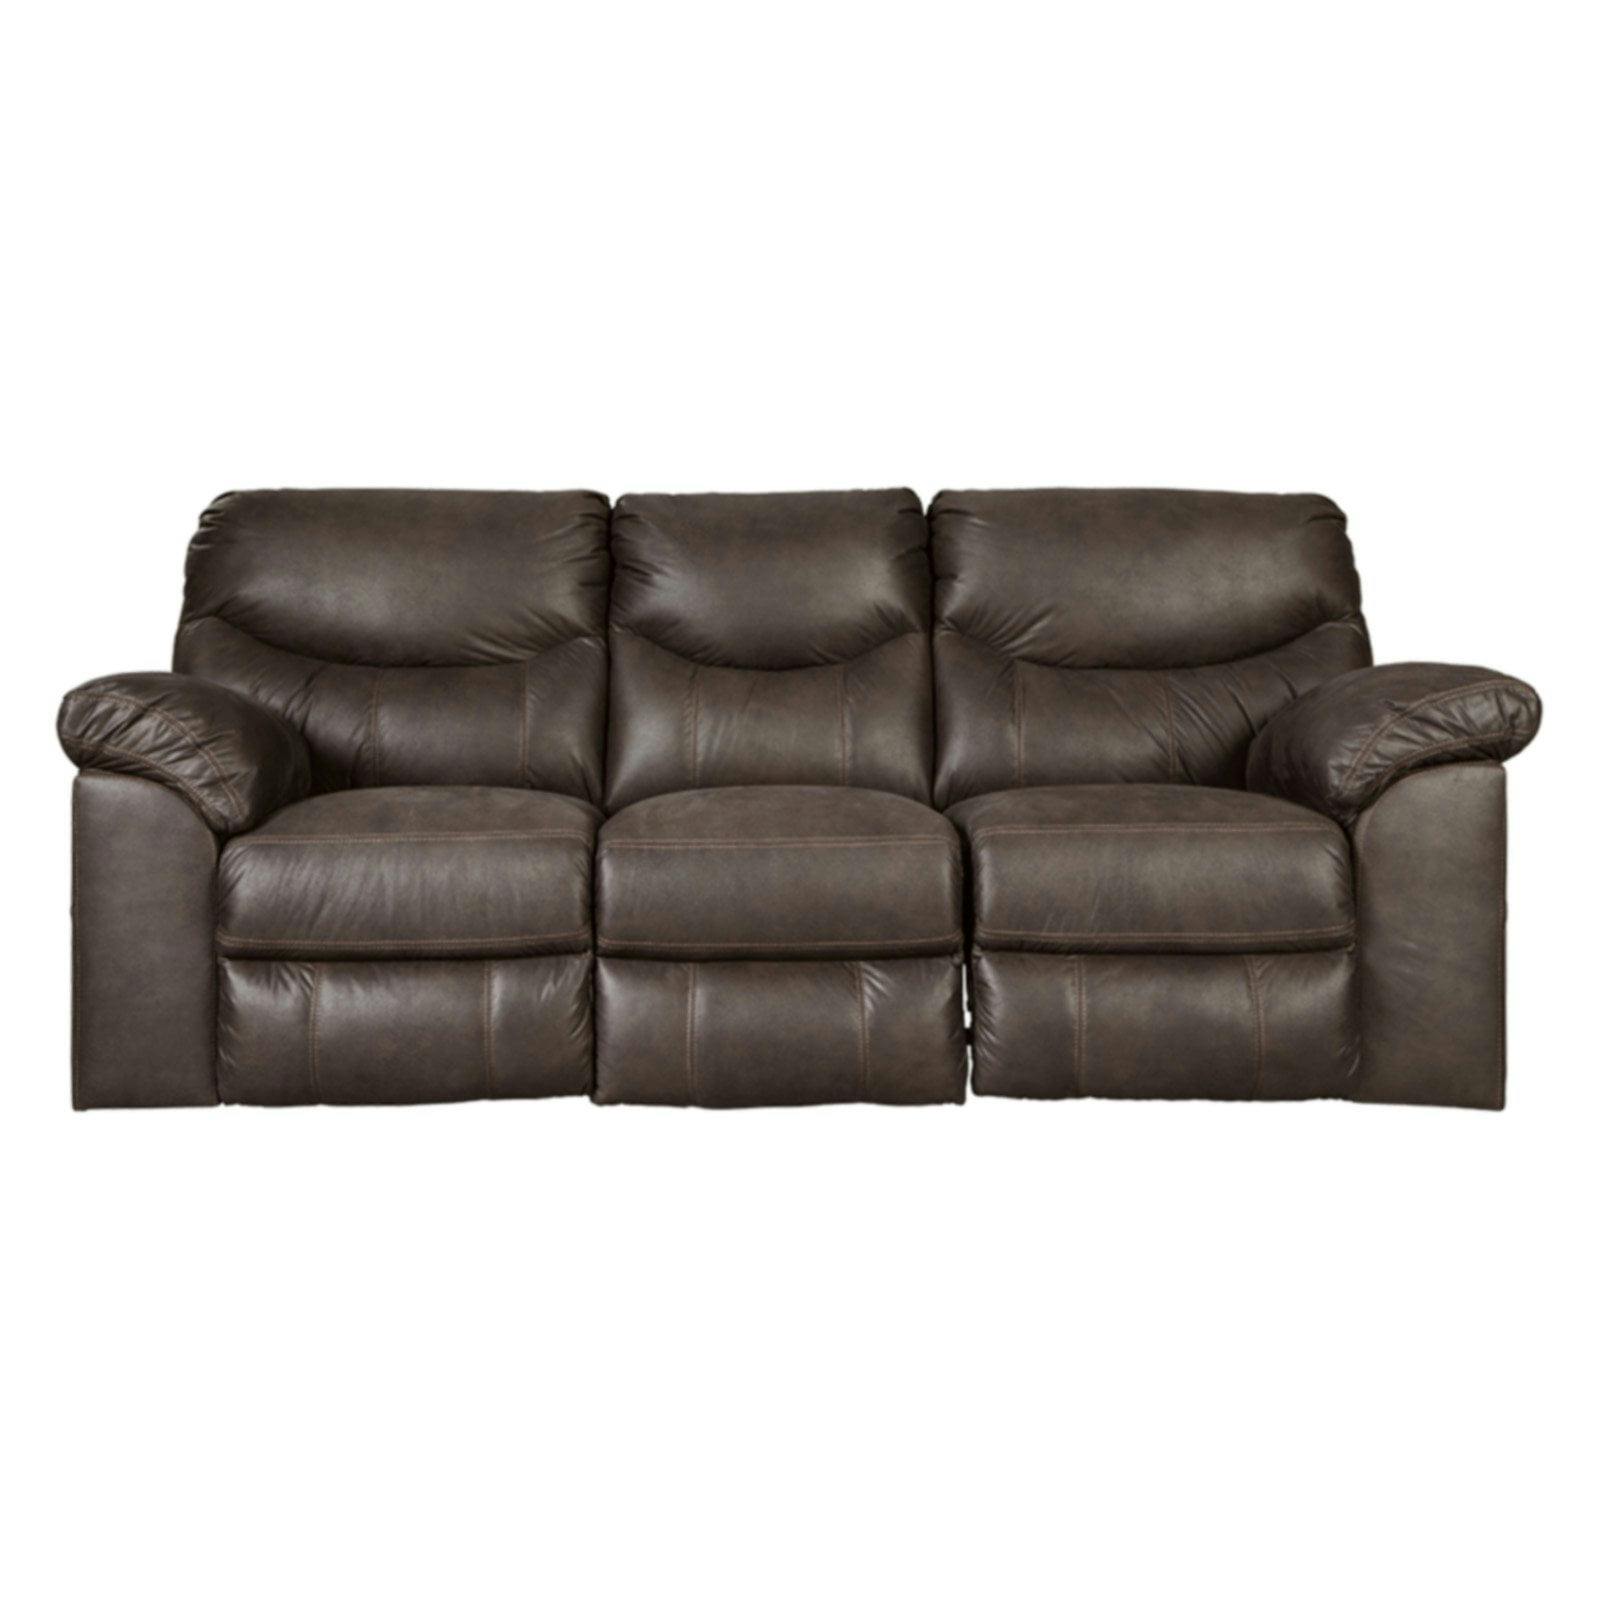 Boxberg Contemporary Brown Faux Leather Reclining Sofa